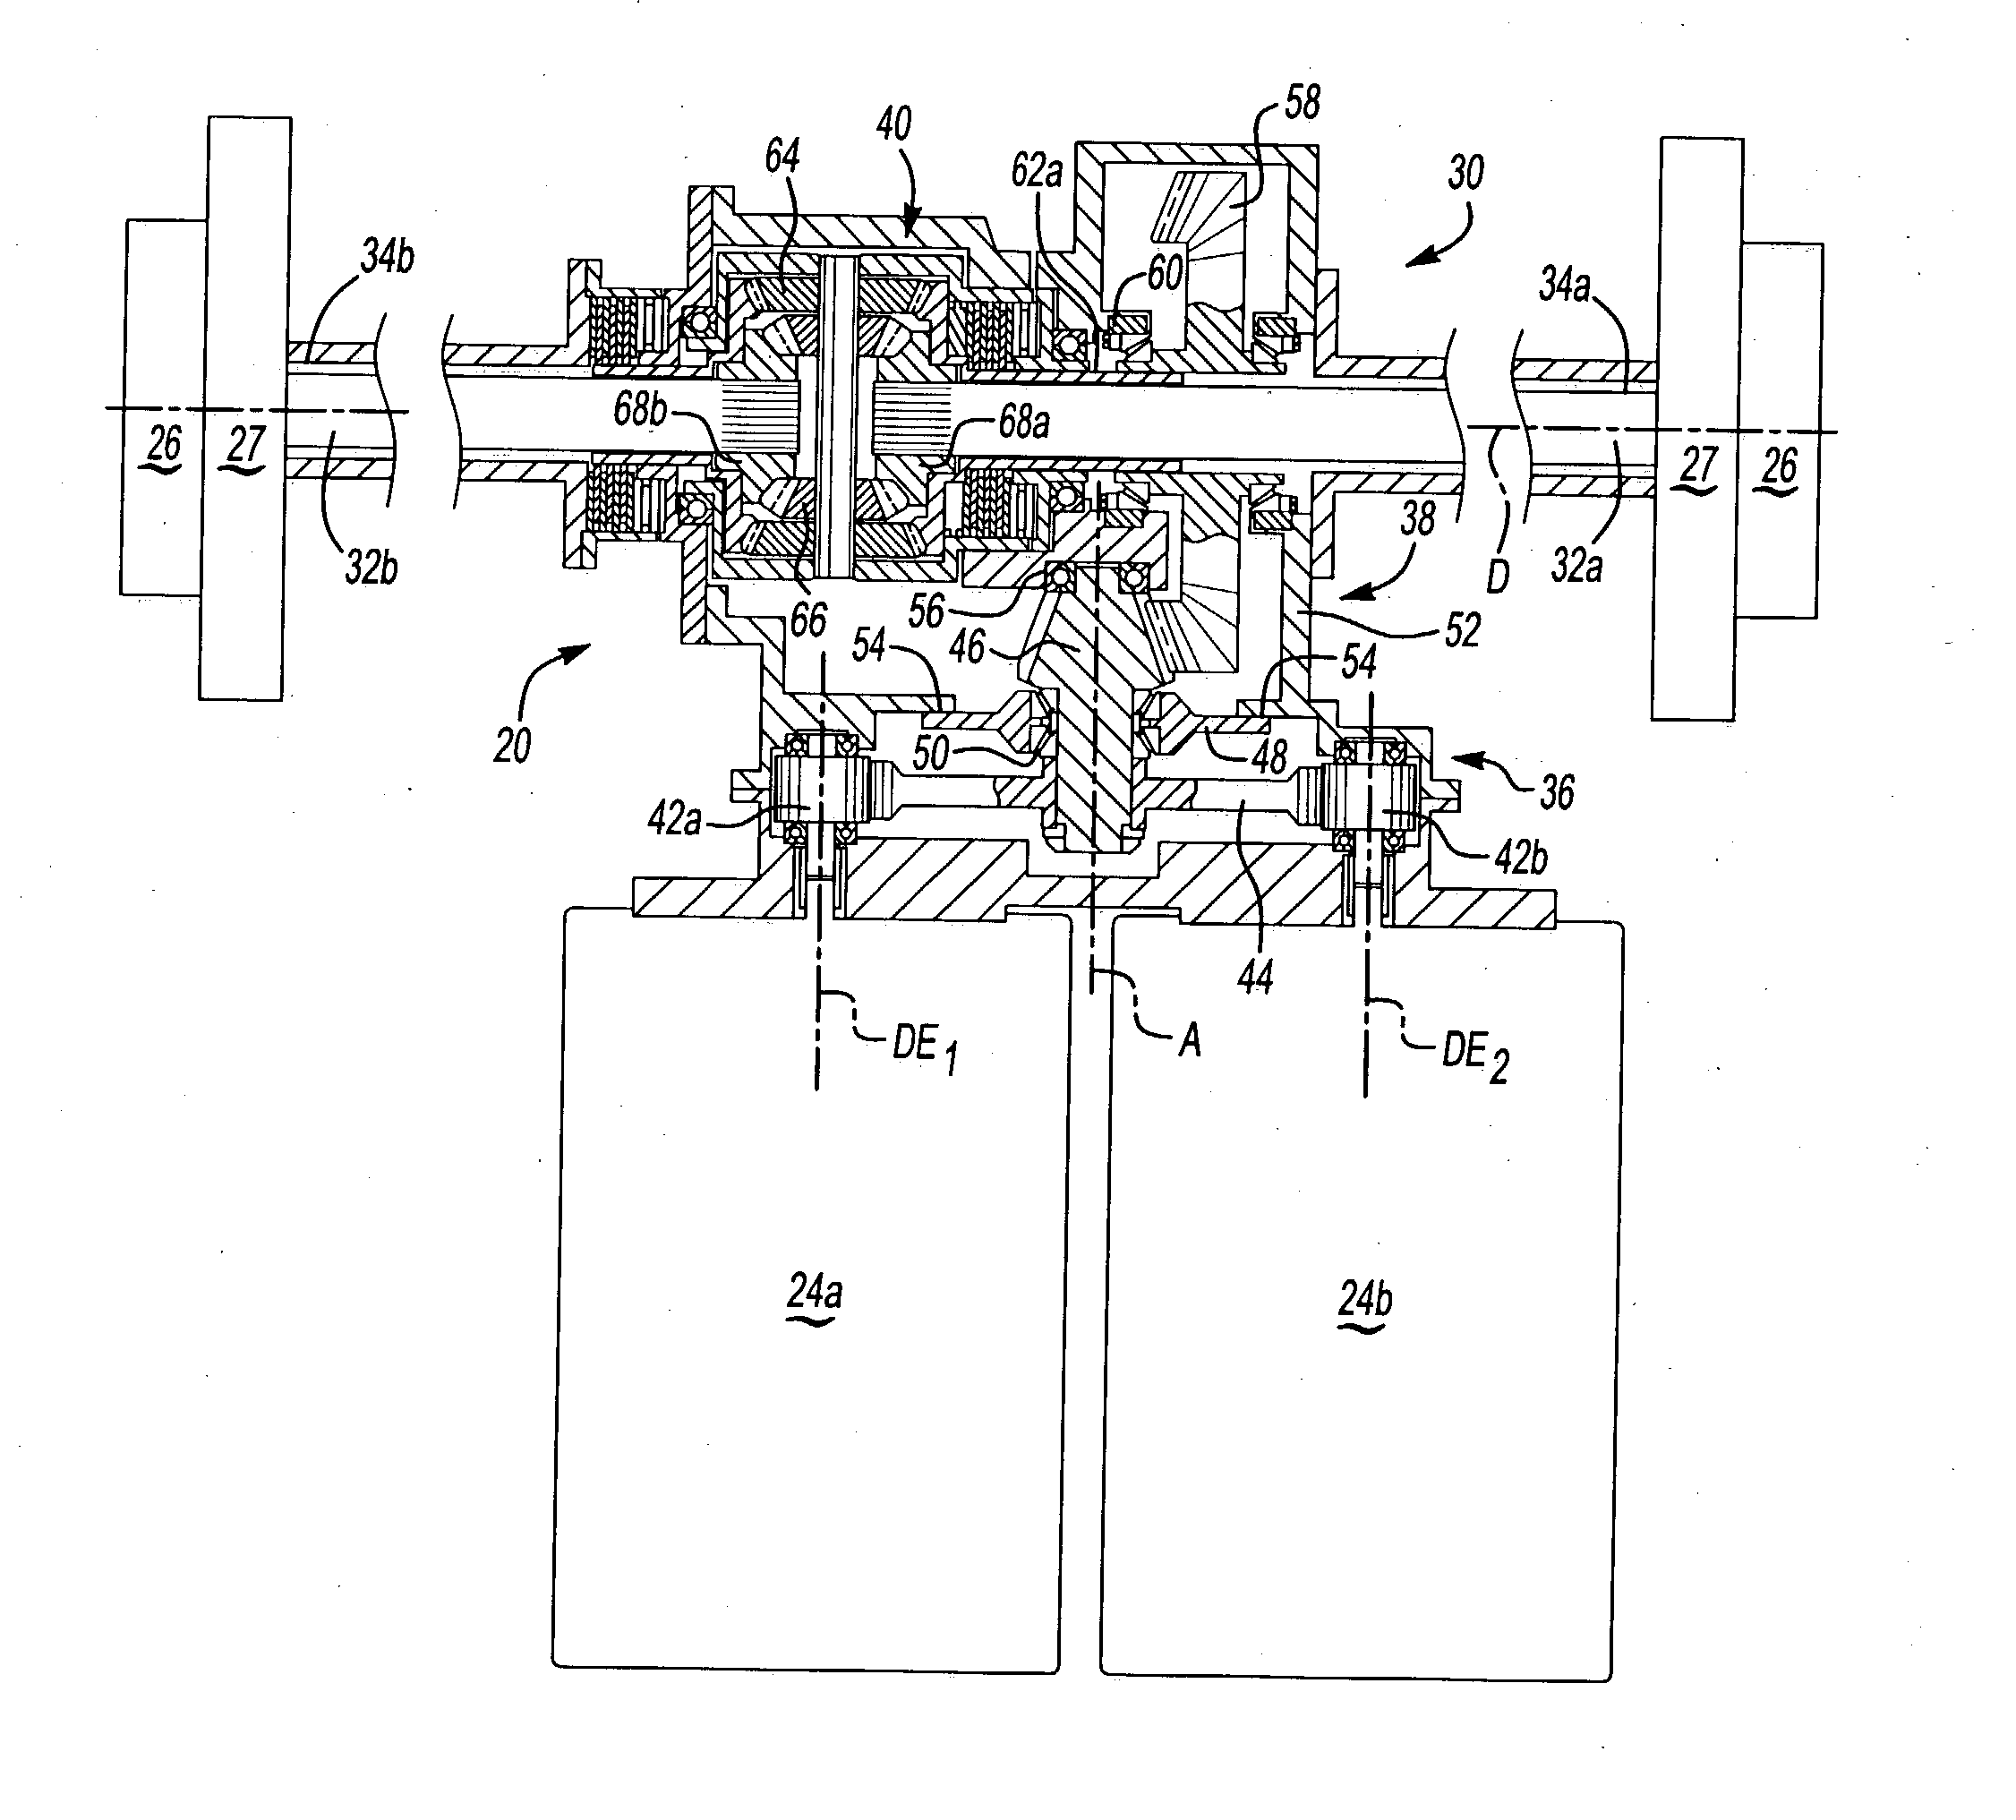 Axle assembly with transverse mounted electric motors